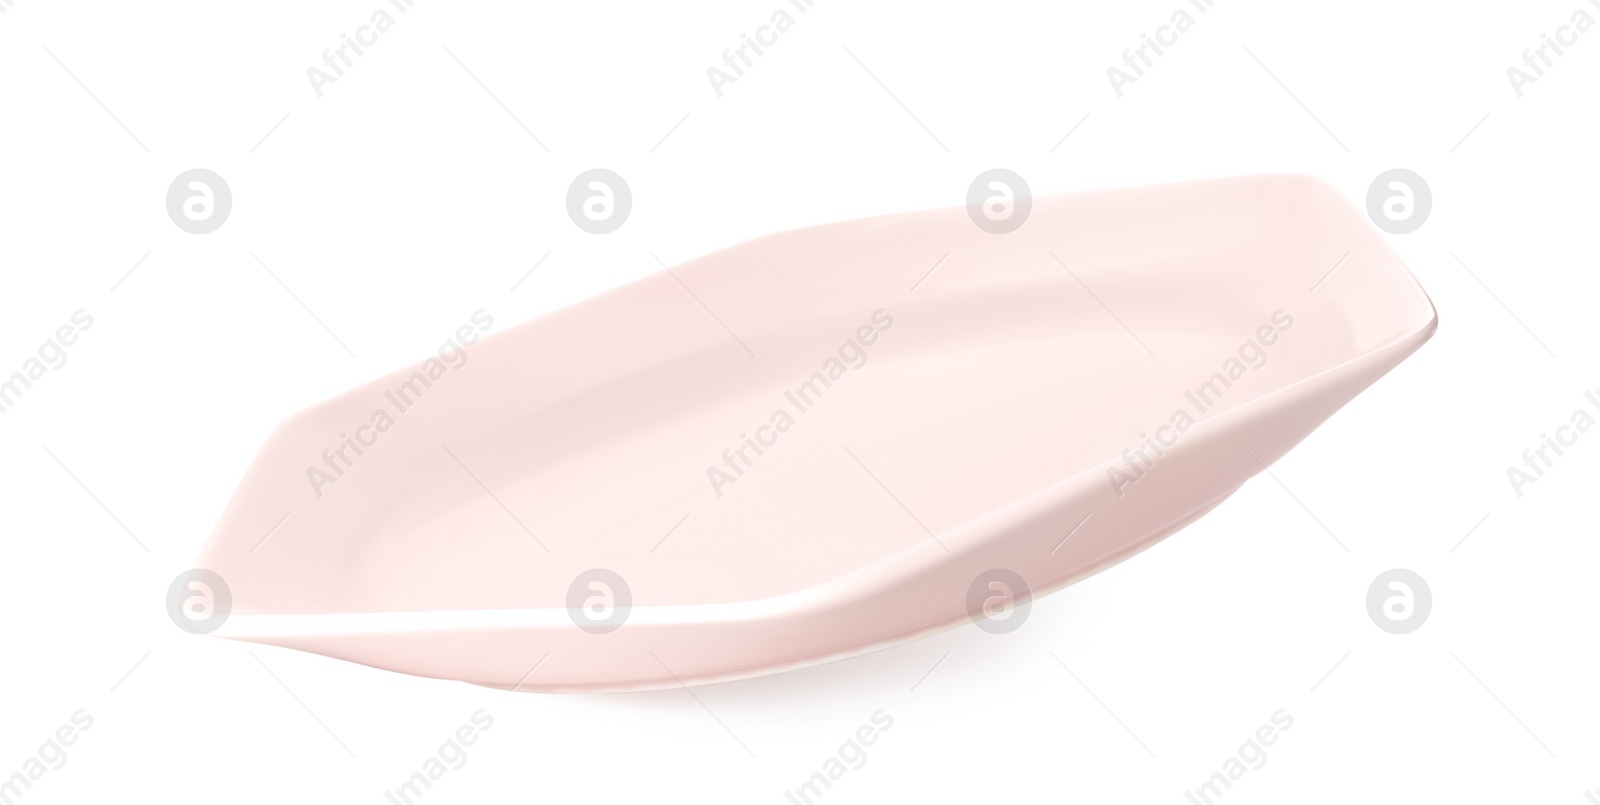 Photo of Clean light pink plate isolated on white